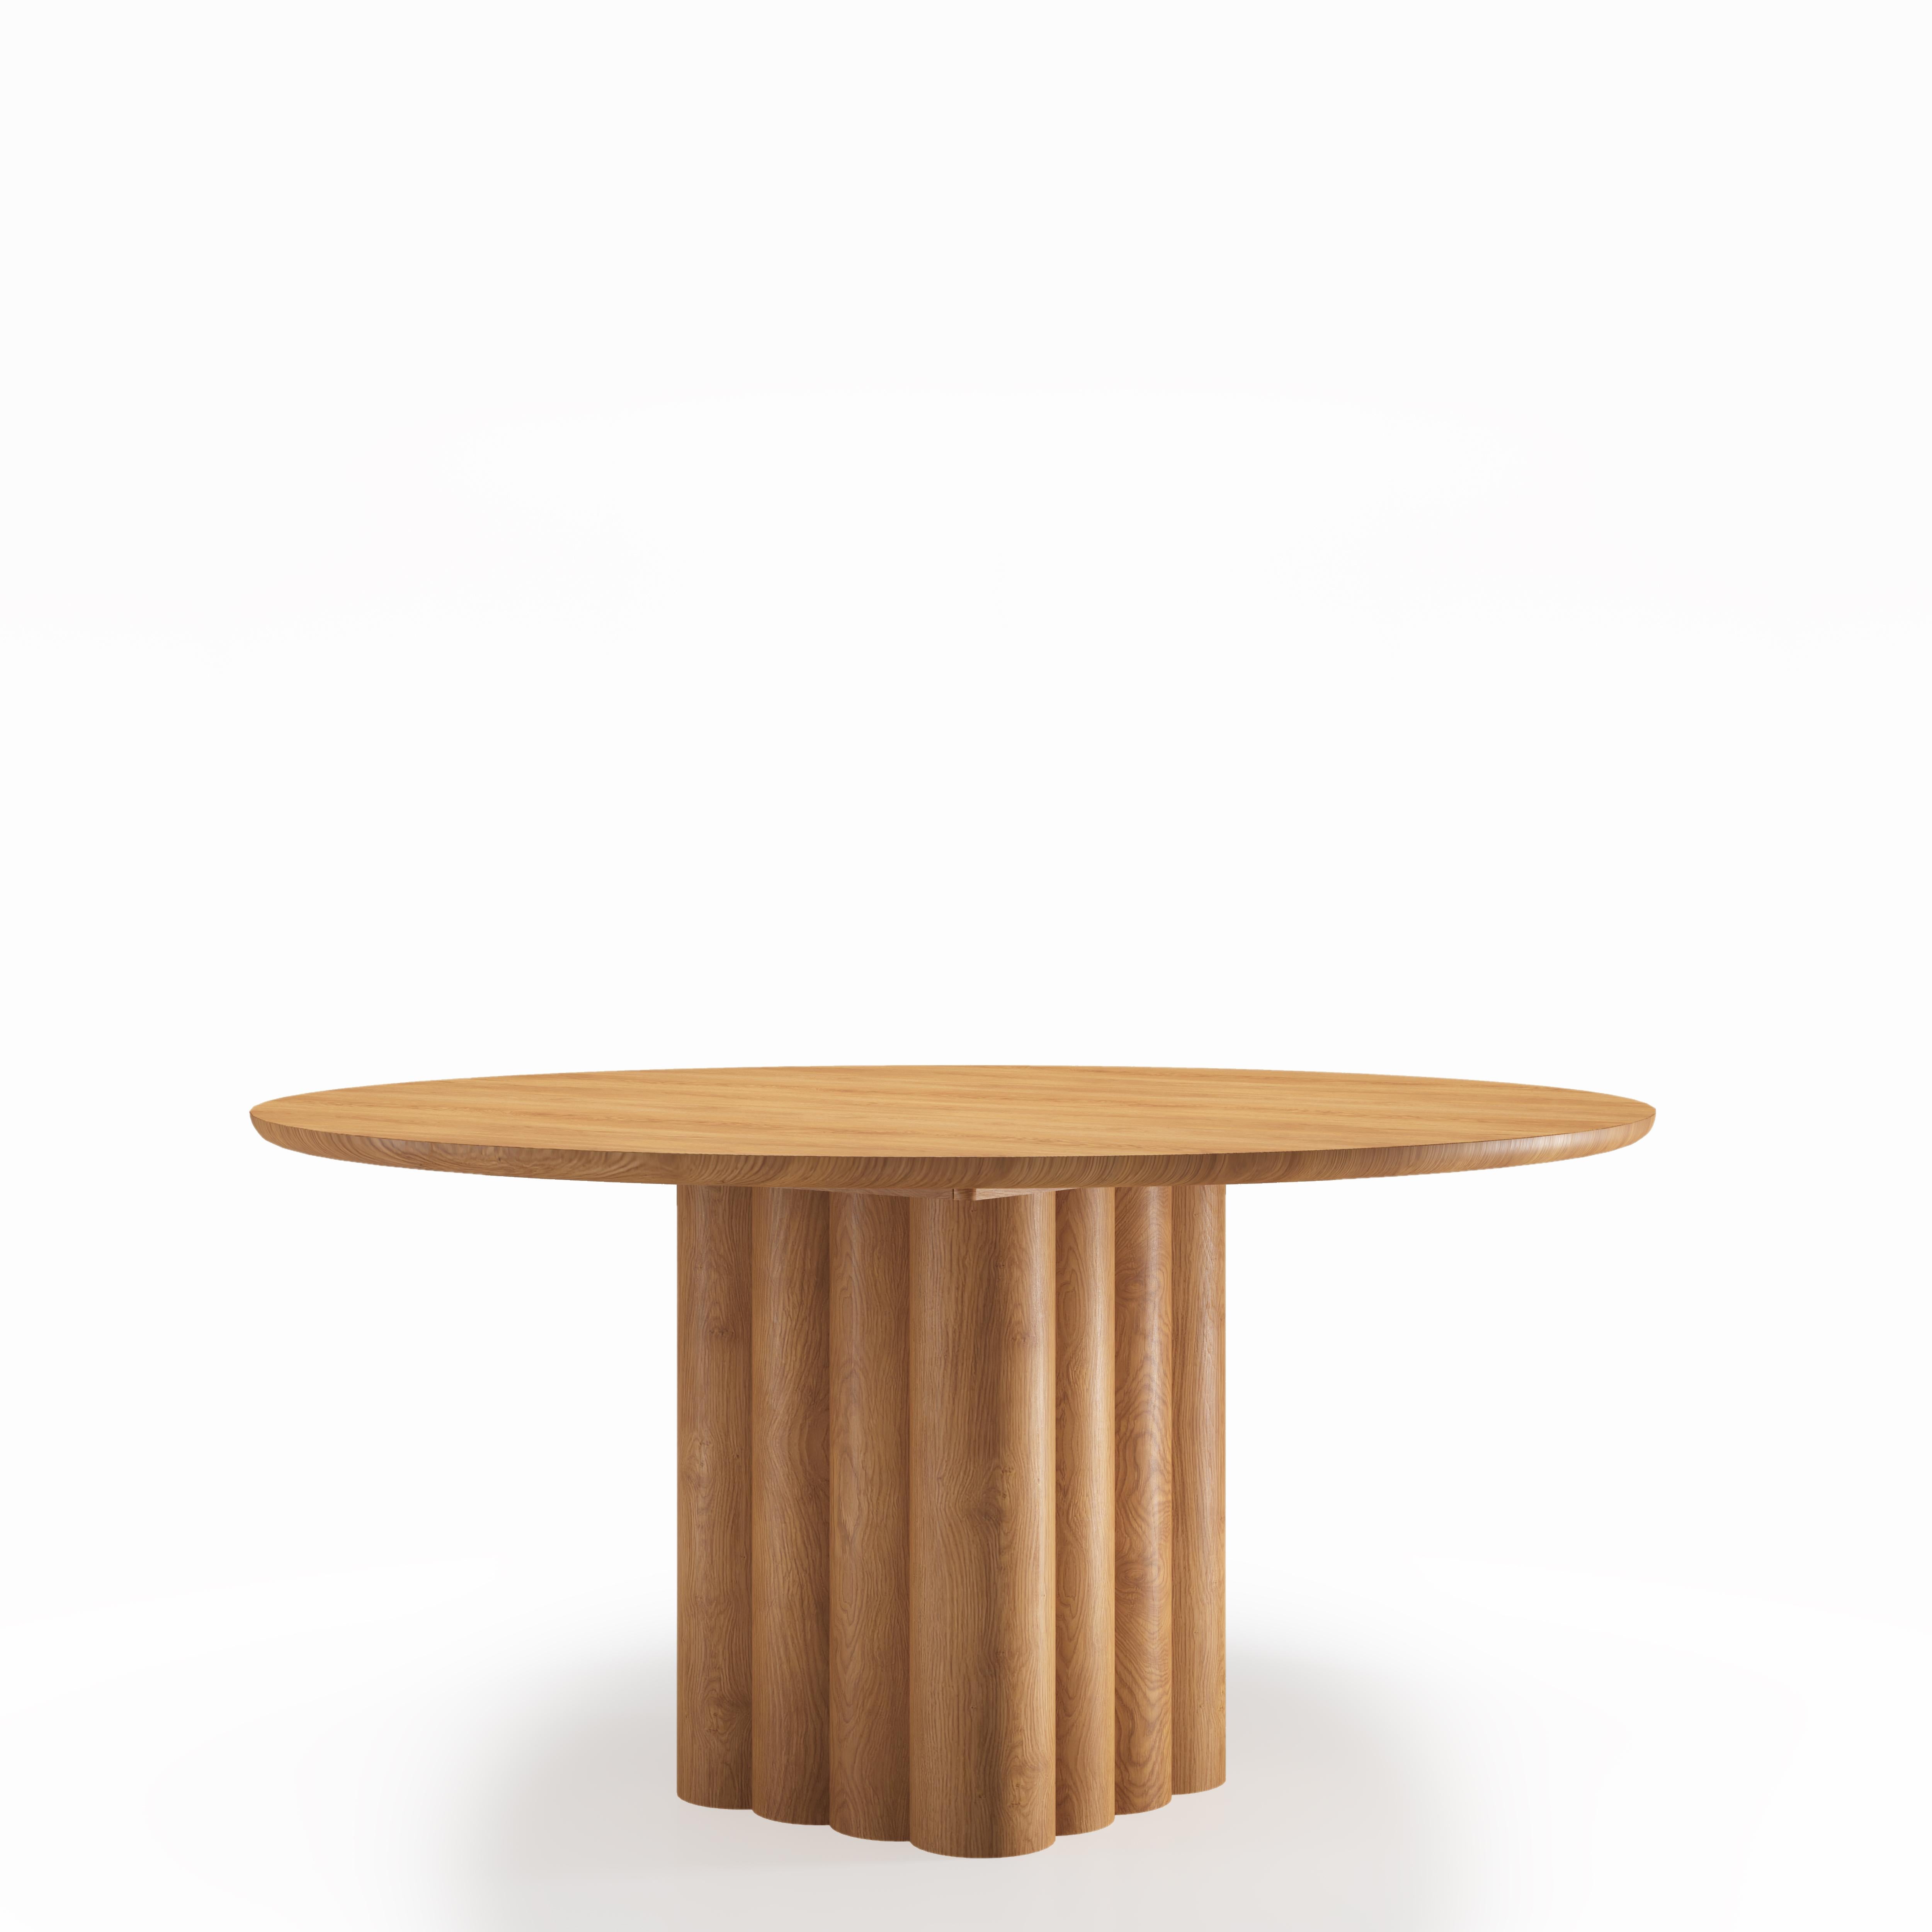 Round Dining Table 'Plush' by Dk3, Smoked Oak or Walnut, 160 cm For Sale 6